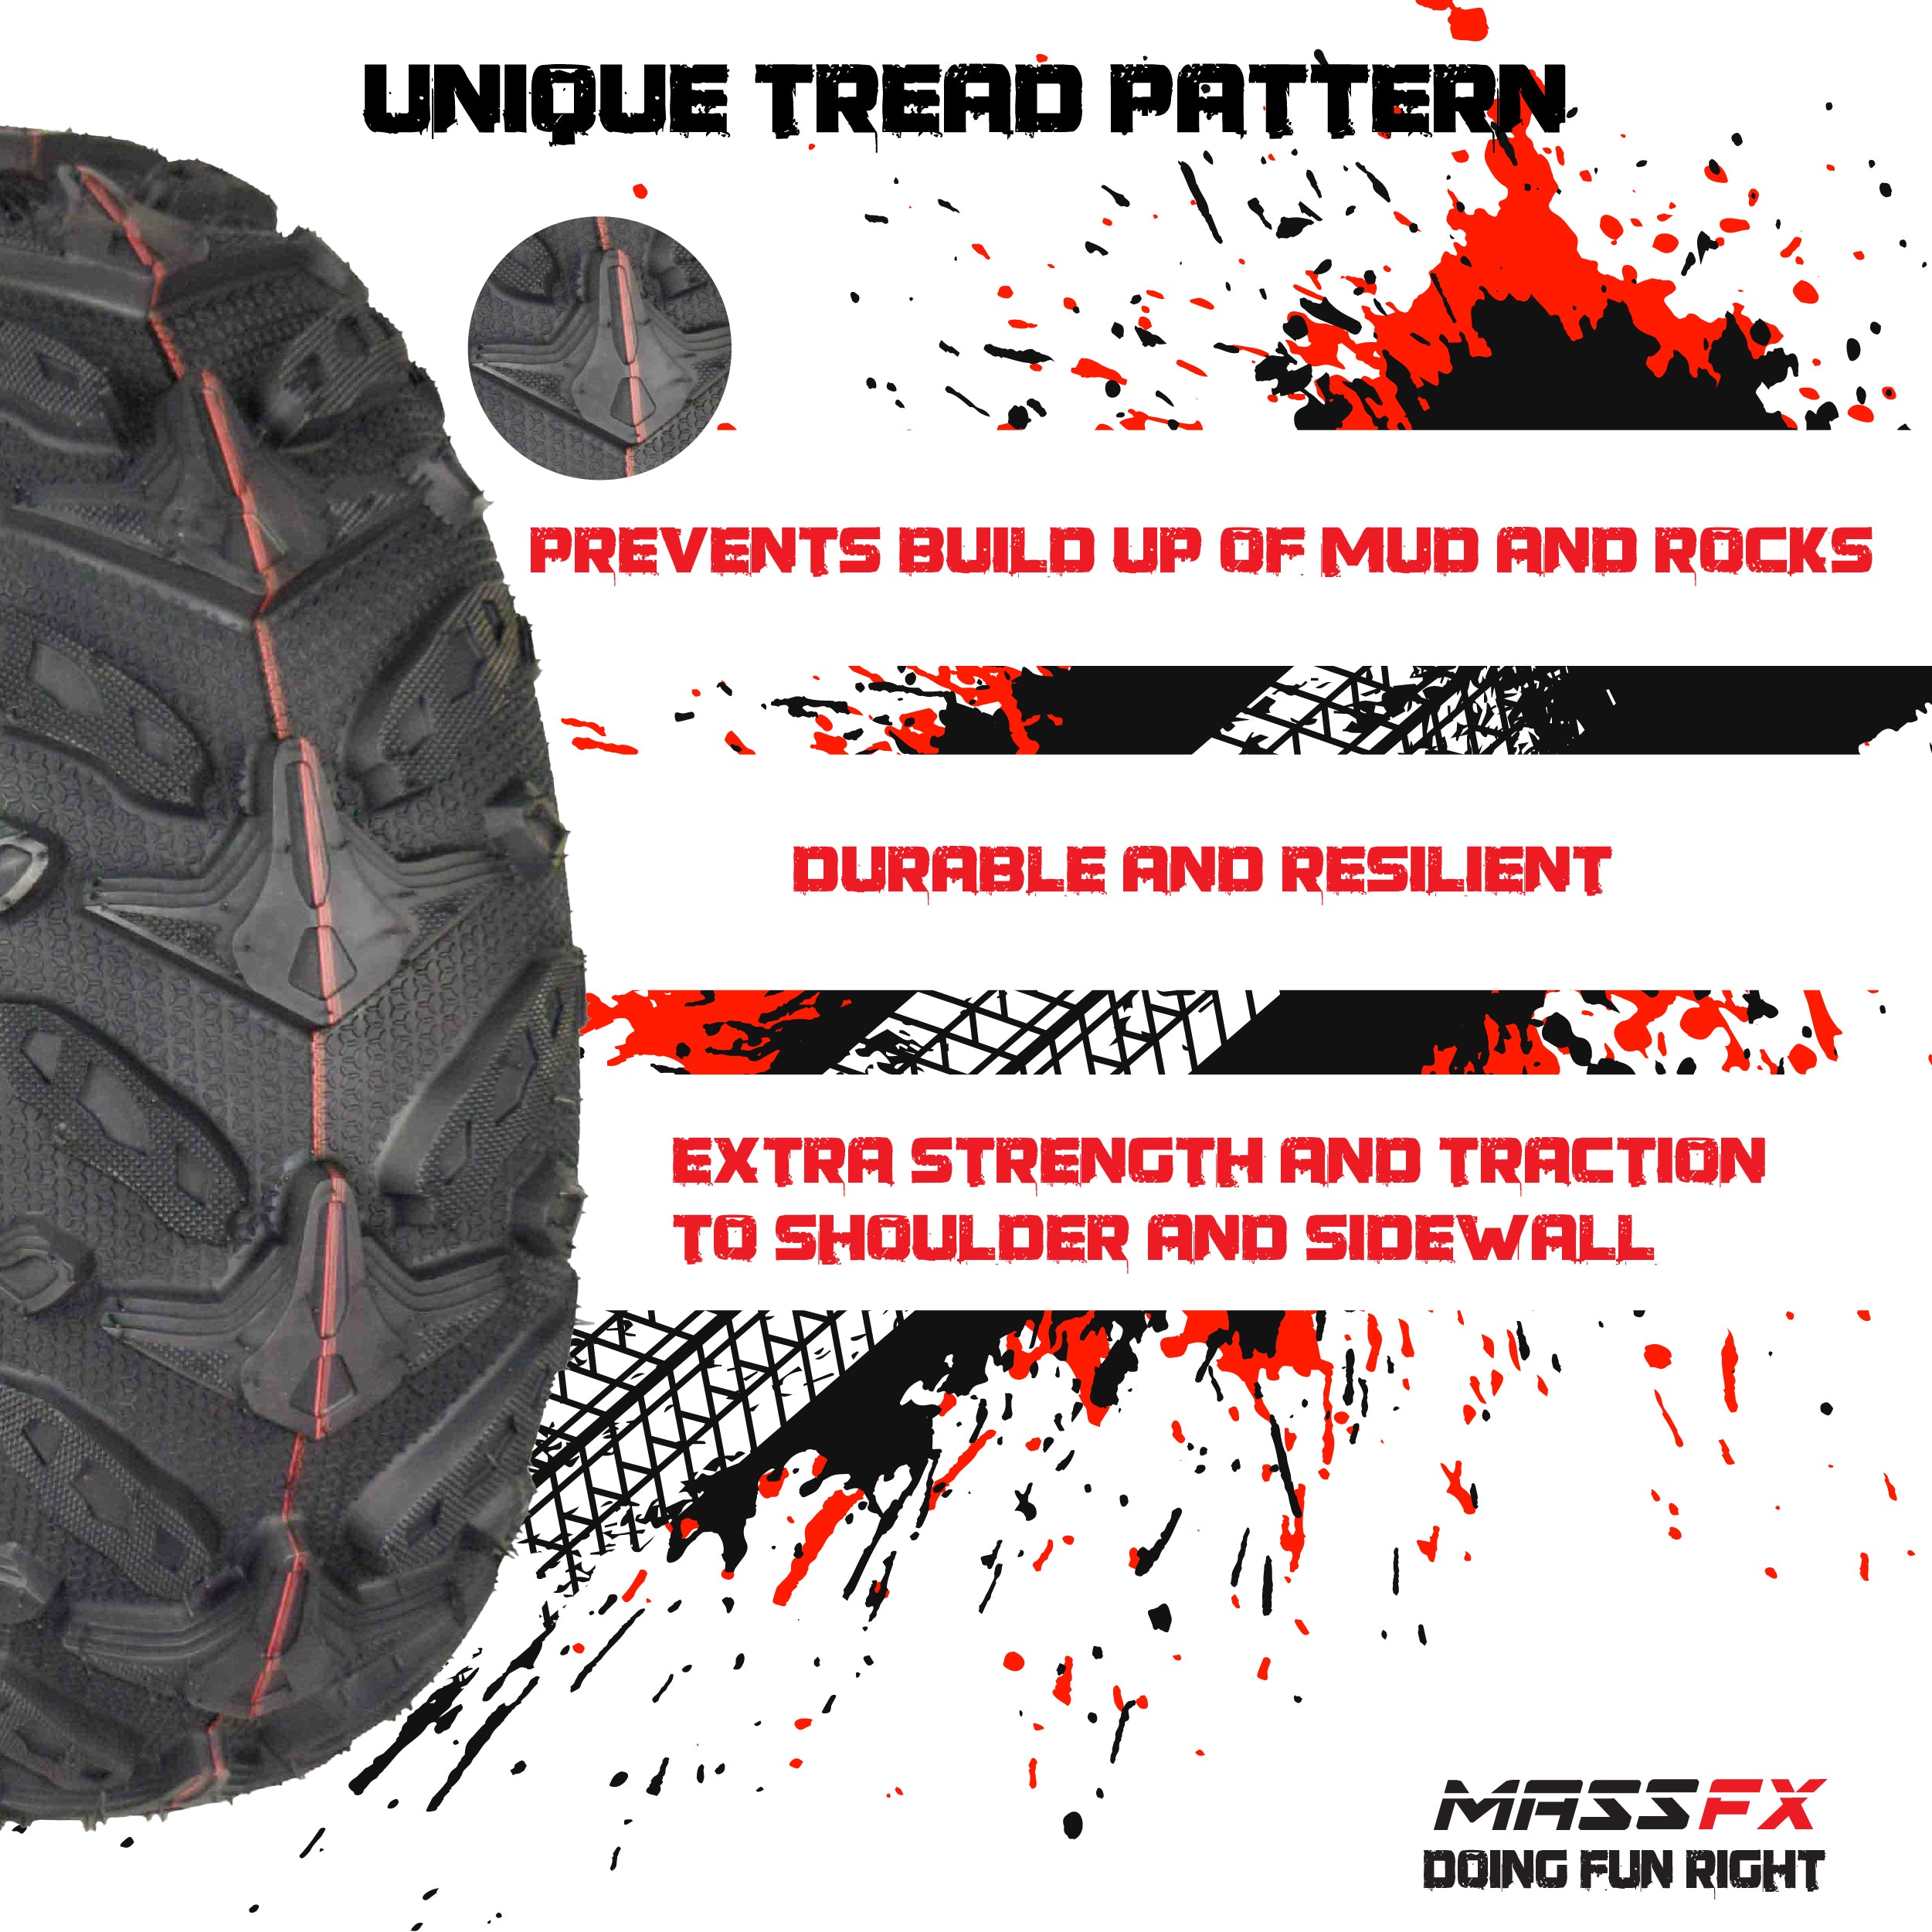 MASSFX Grinder 24x10-11 Rear ATV Tire 6 Ply for Soft/Hard Pack Ground